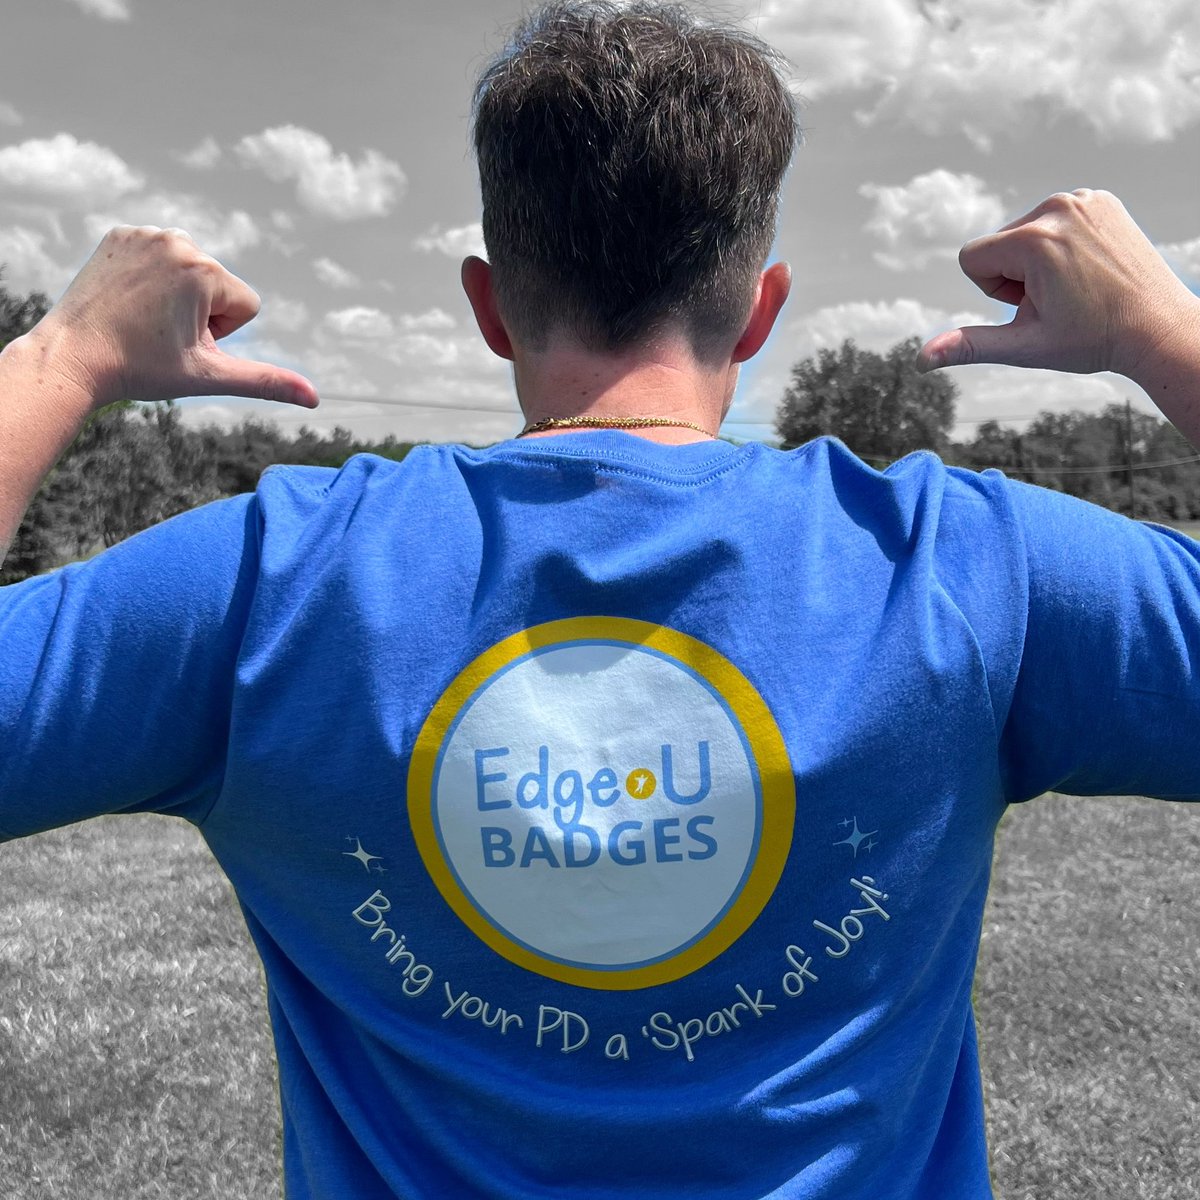 Adding a little ‘Spark of Joy’ to your day is what the #EduGuardians are all about! 

Can’t wait to showcase what @EdgeUBadges has in store for #ISTELive24! 

#TechTshirtTuesday @EduGuardian5